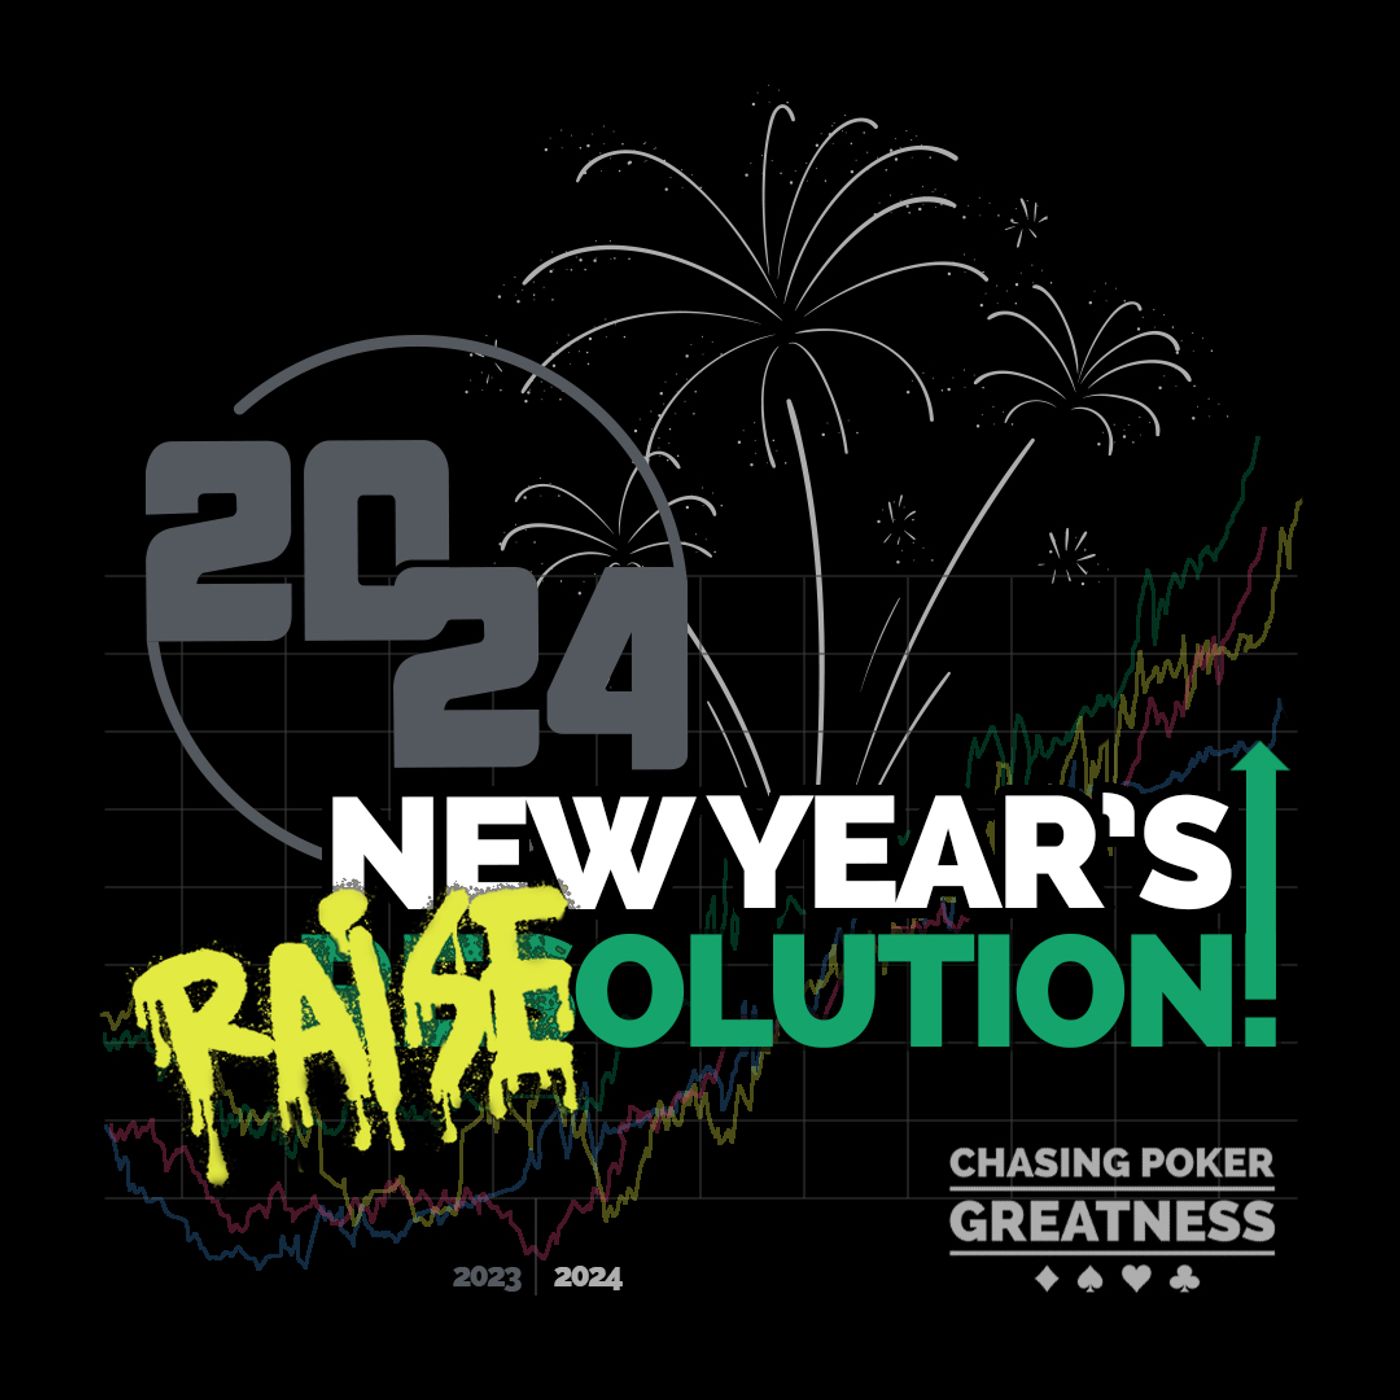 The 2024 New Year's Raiseolution! (HUGE $40k POKER GIVEAWAY) [Over 100 Prizes & Dozens of Winners]